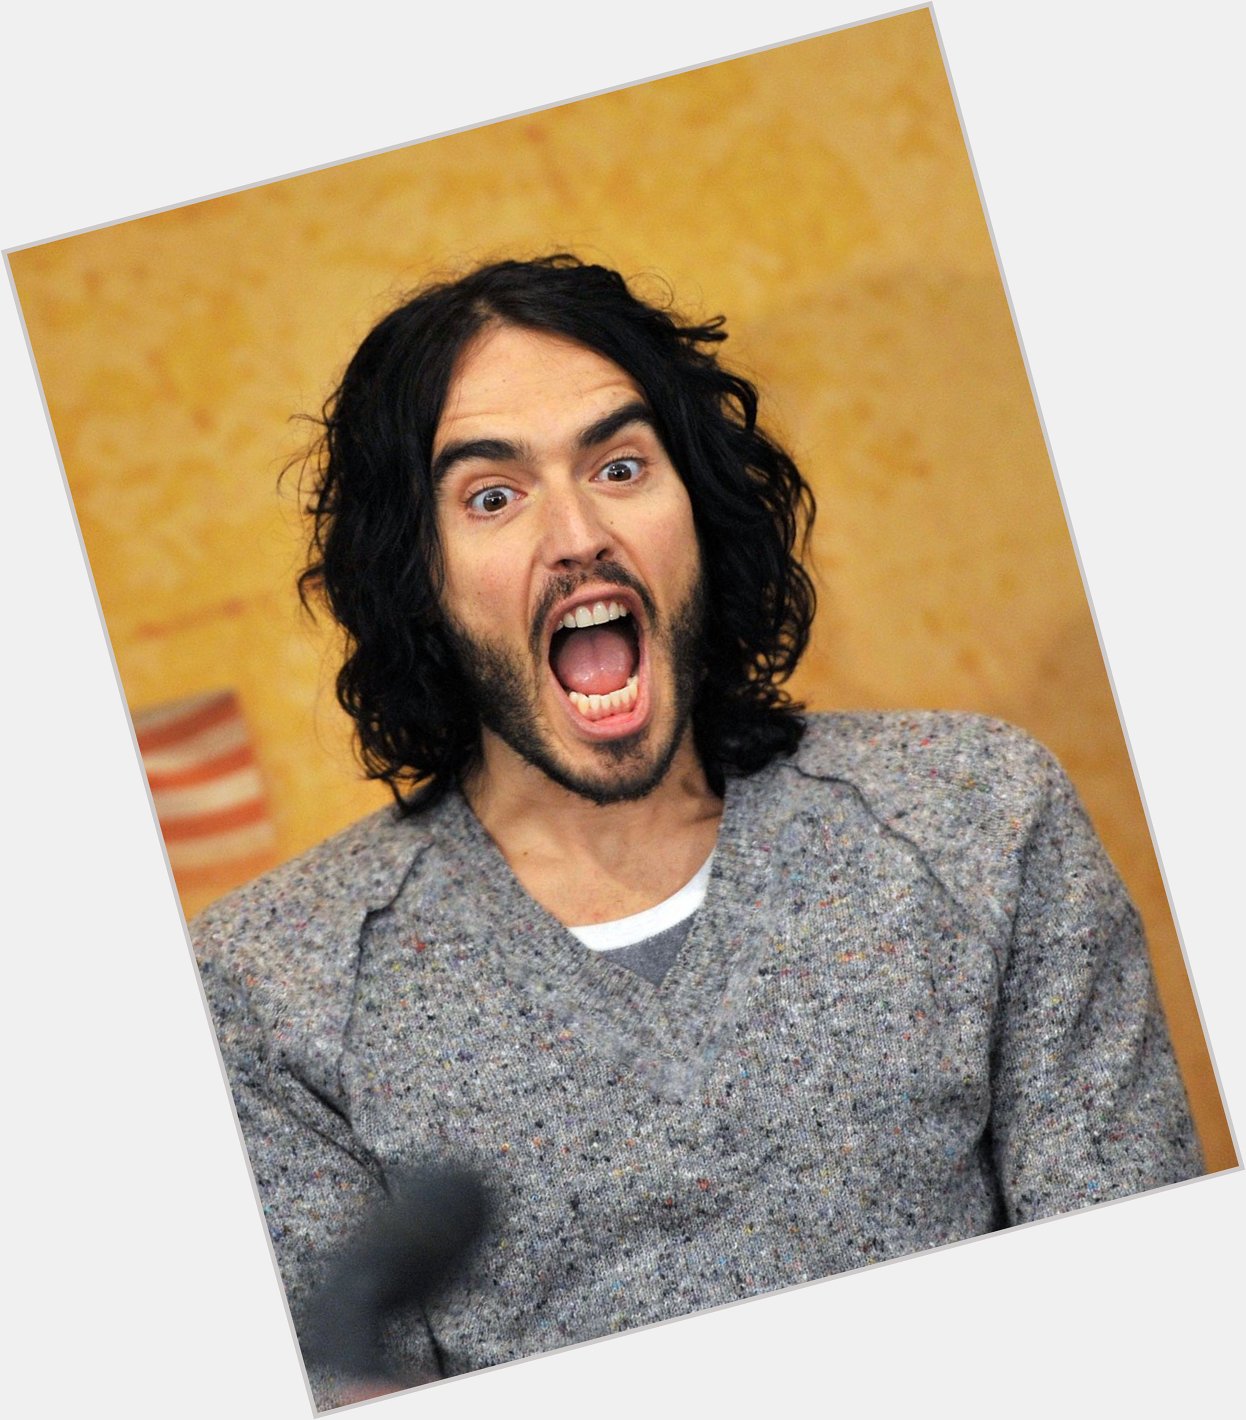 Russell Brand turns the big 4-0 today! Happy birthday to him!
 